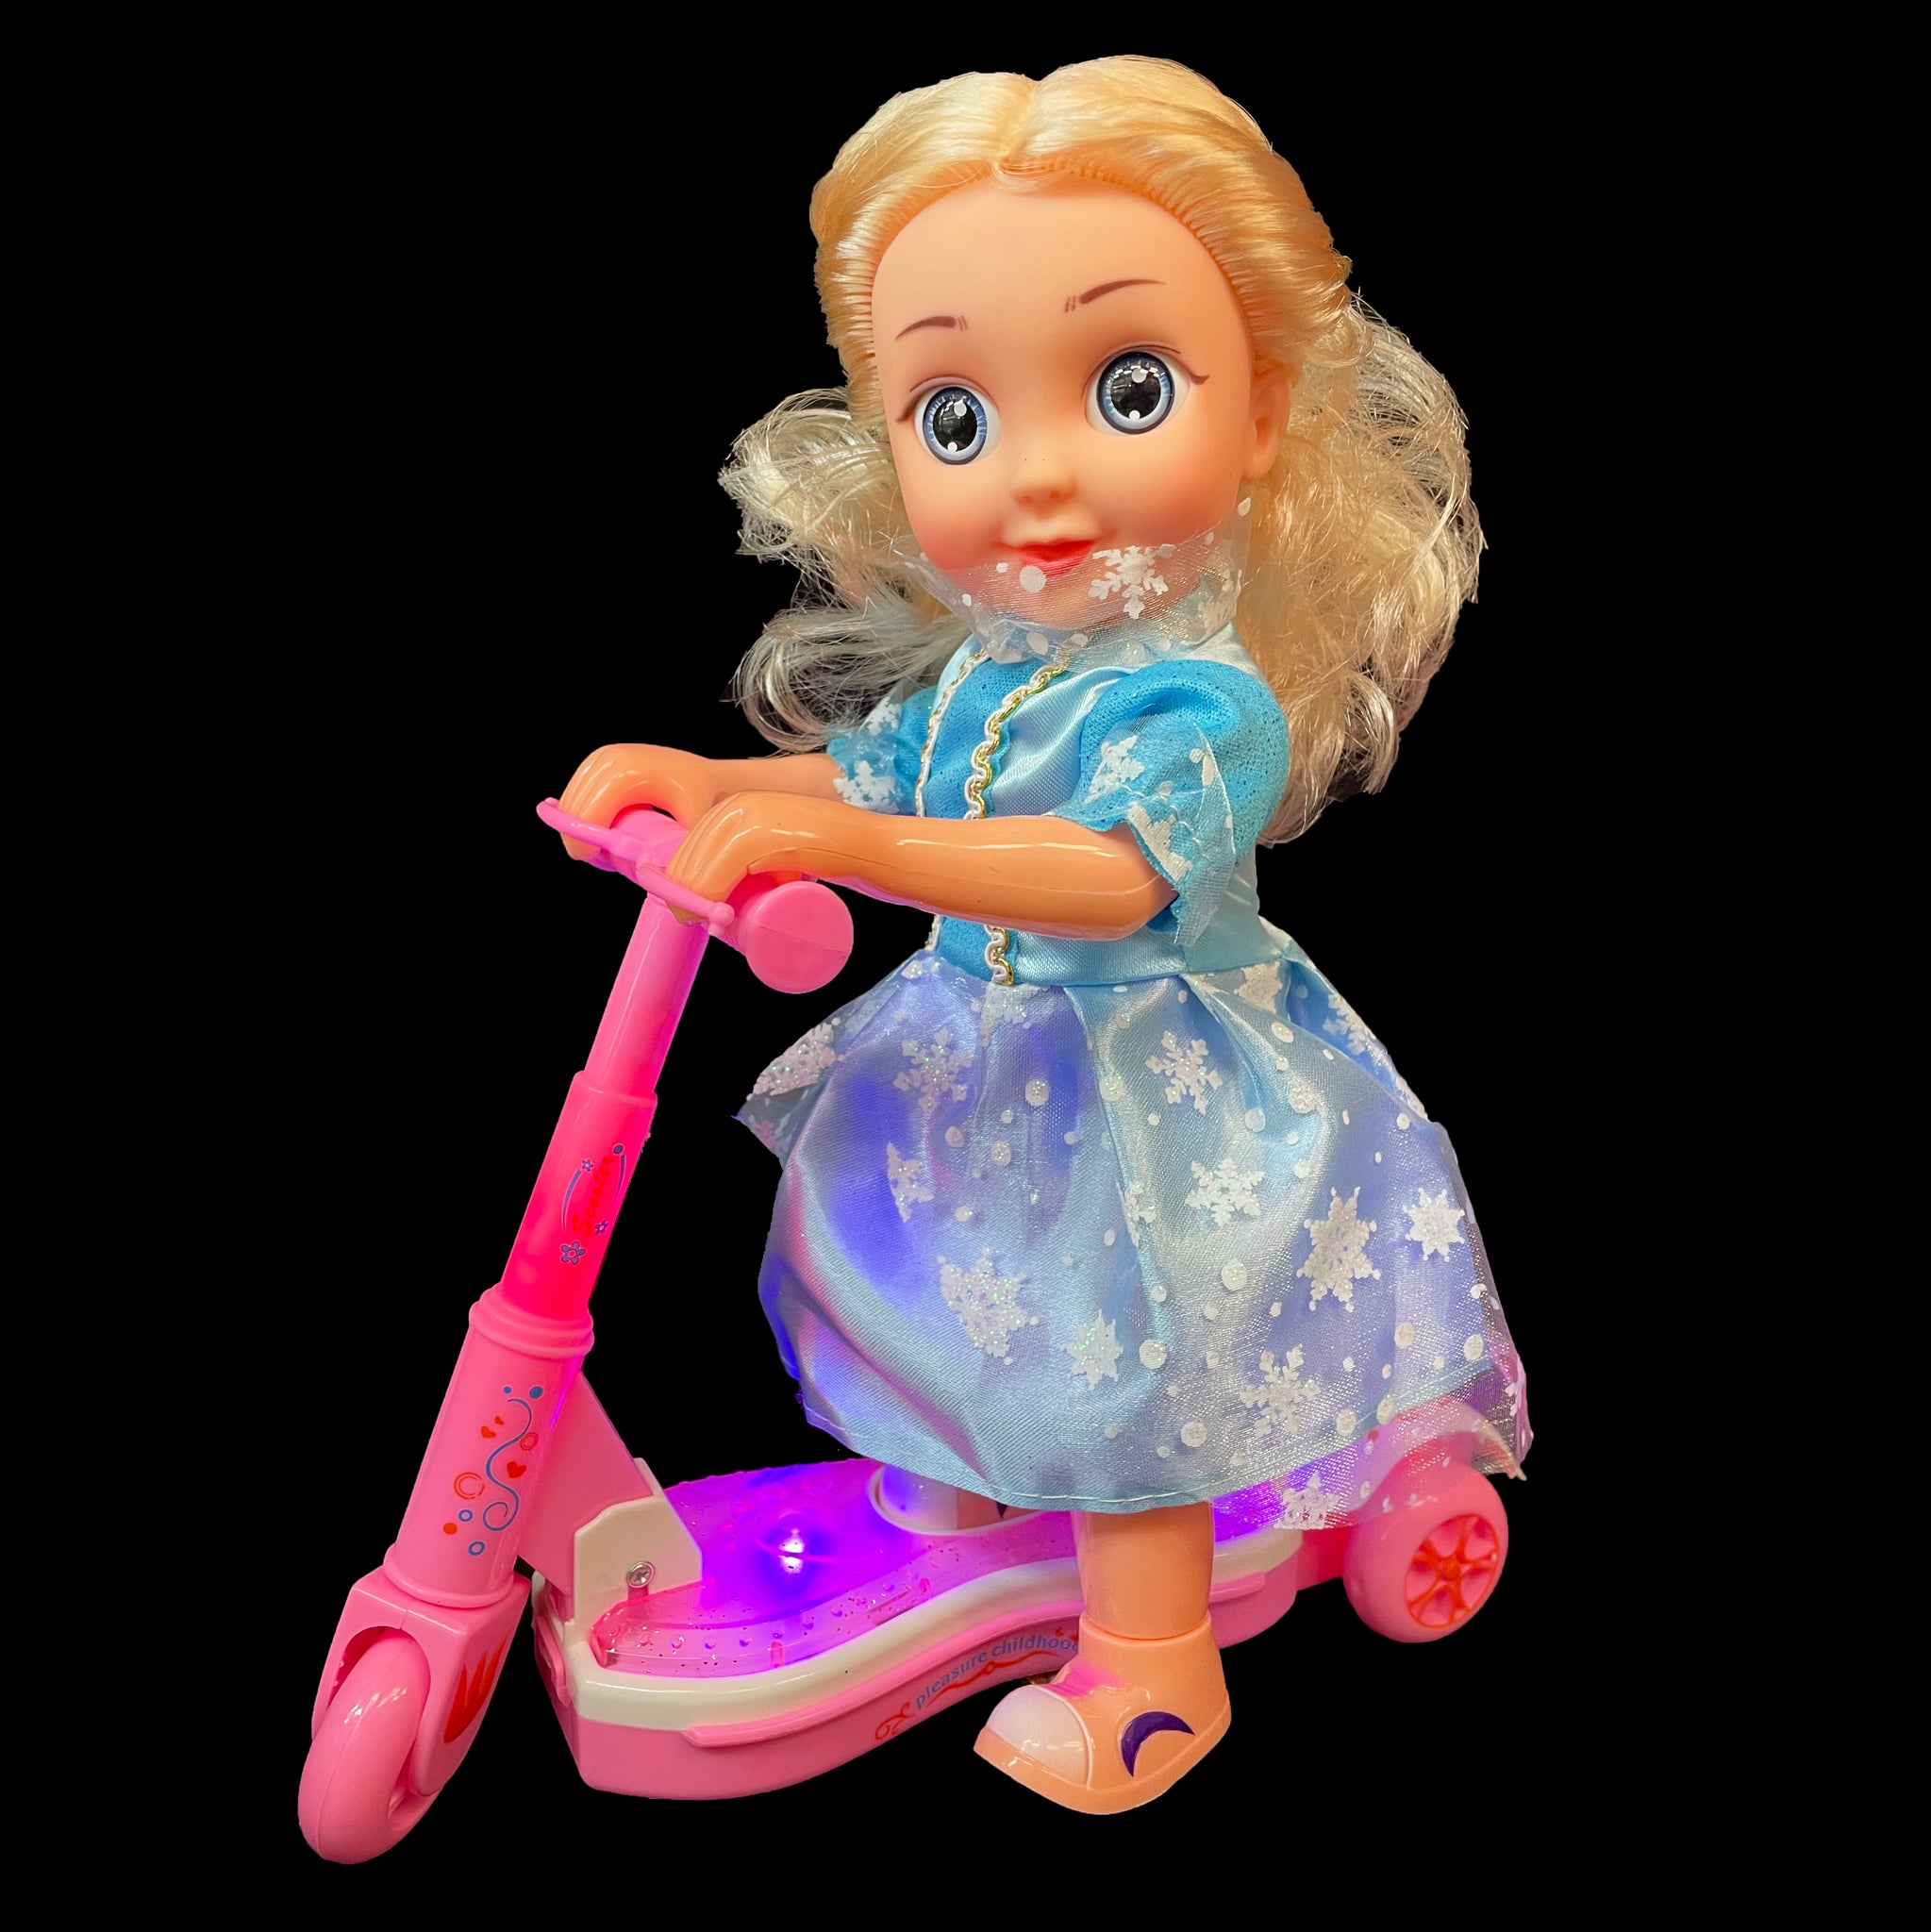 Scooter Doll with light and music